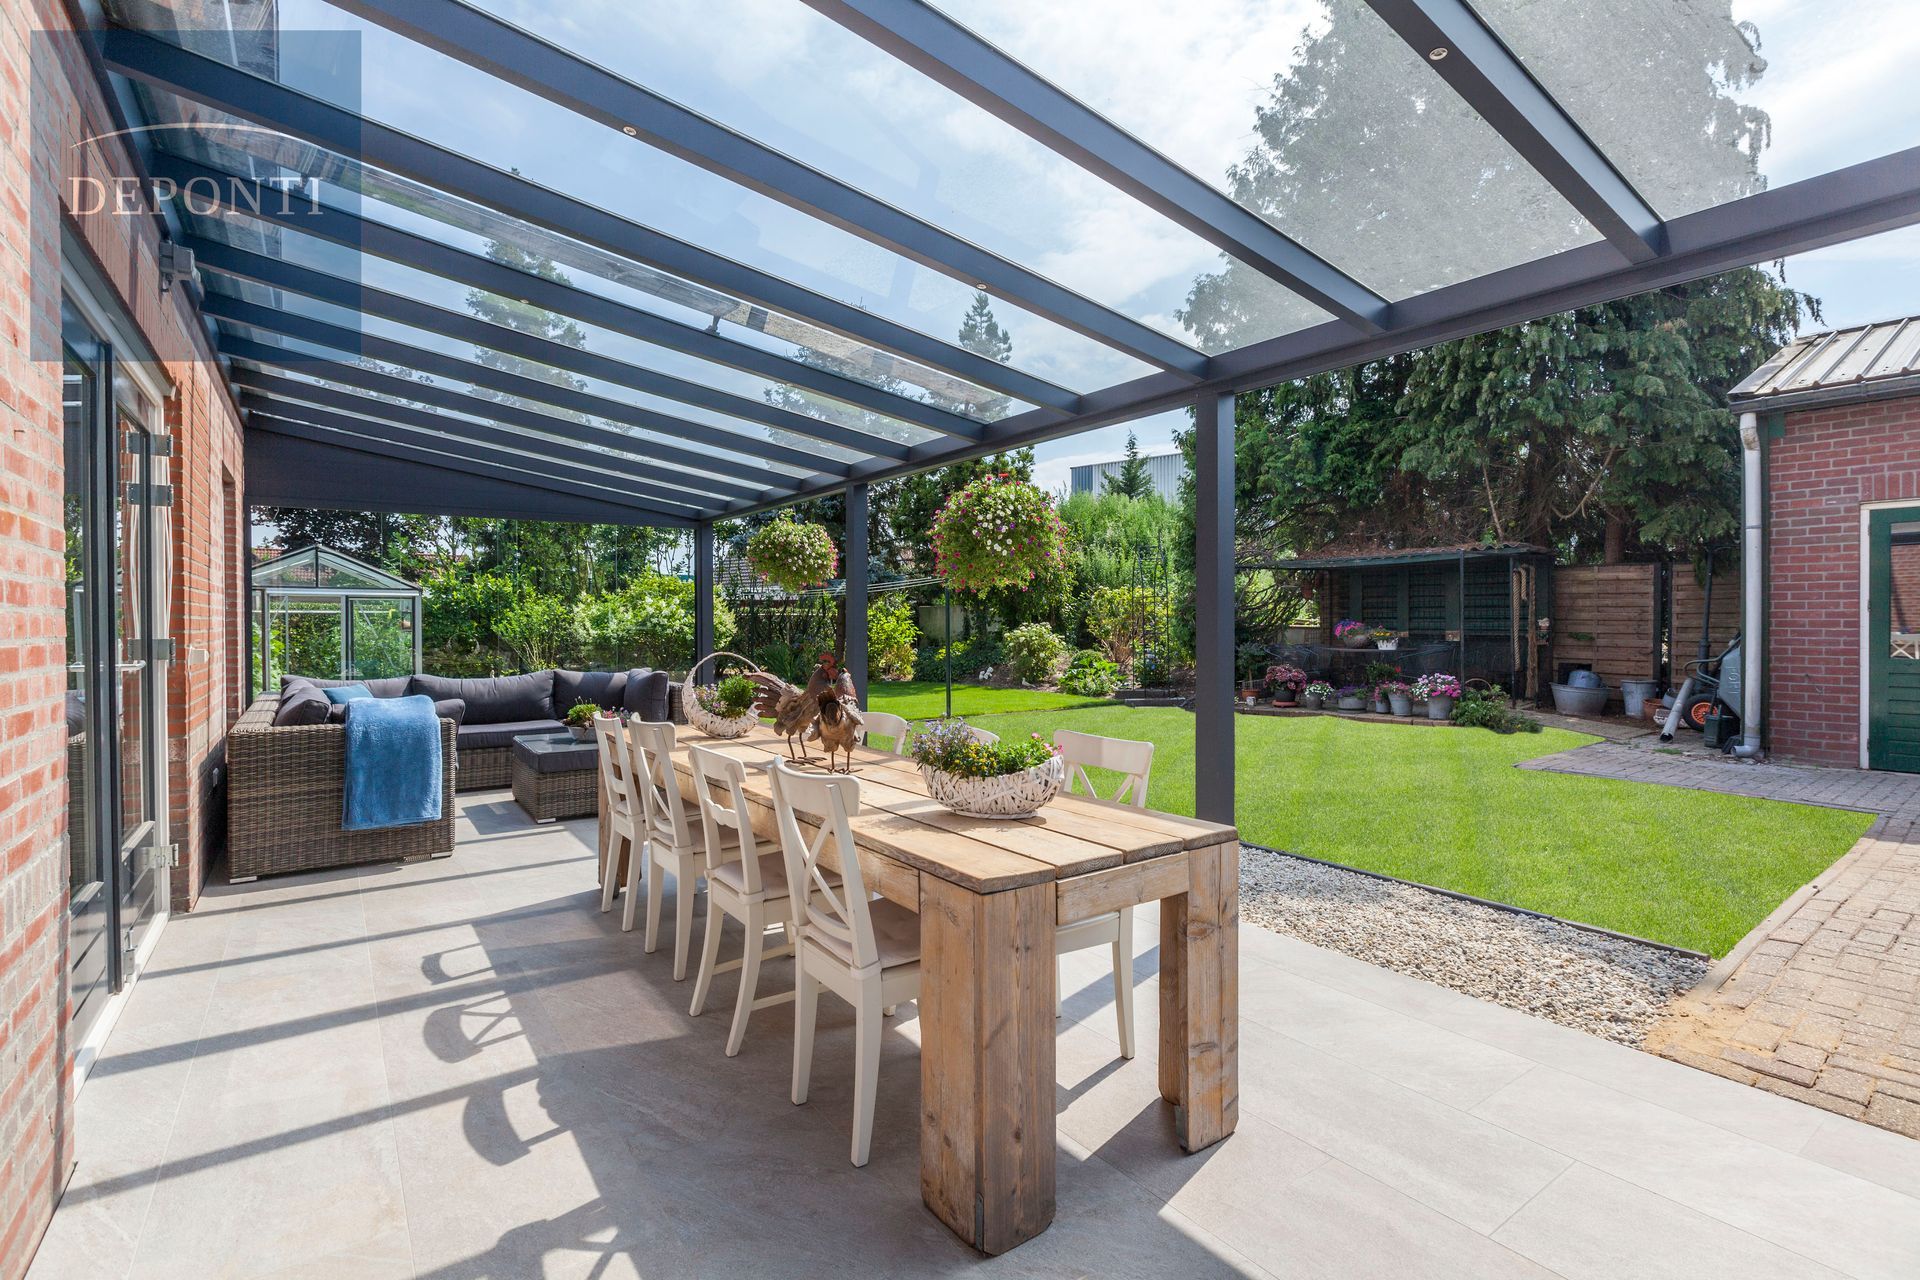 Deponti aluminium veranda and a table and chairs under the canopy